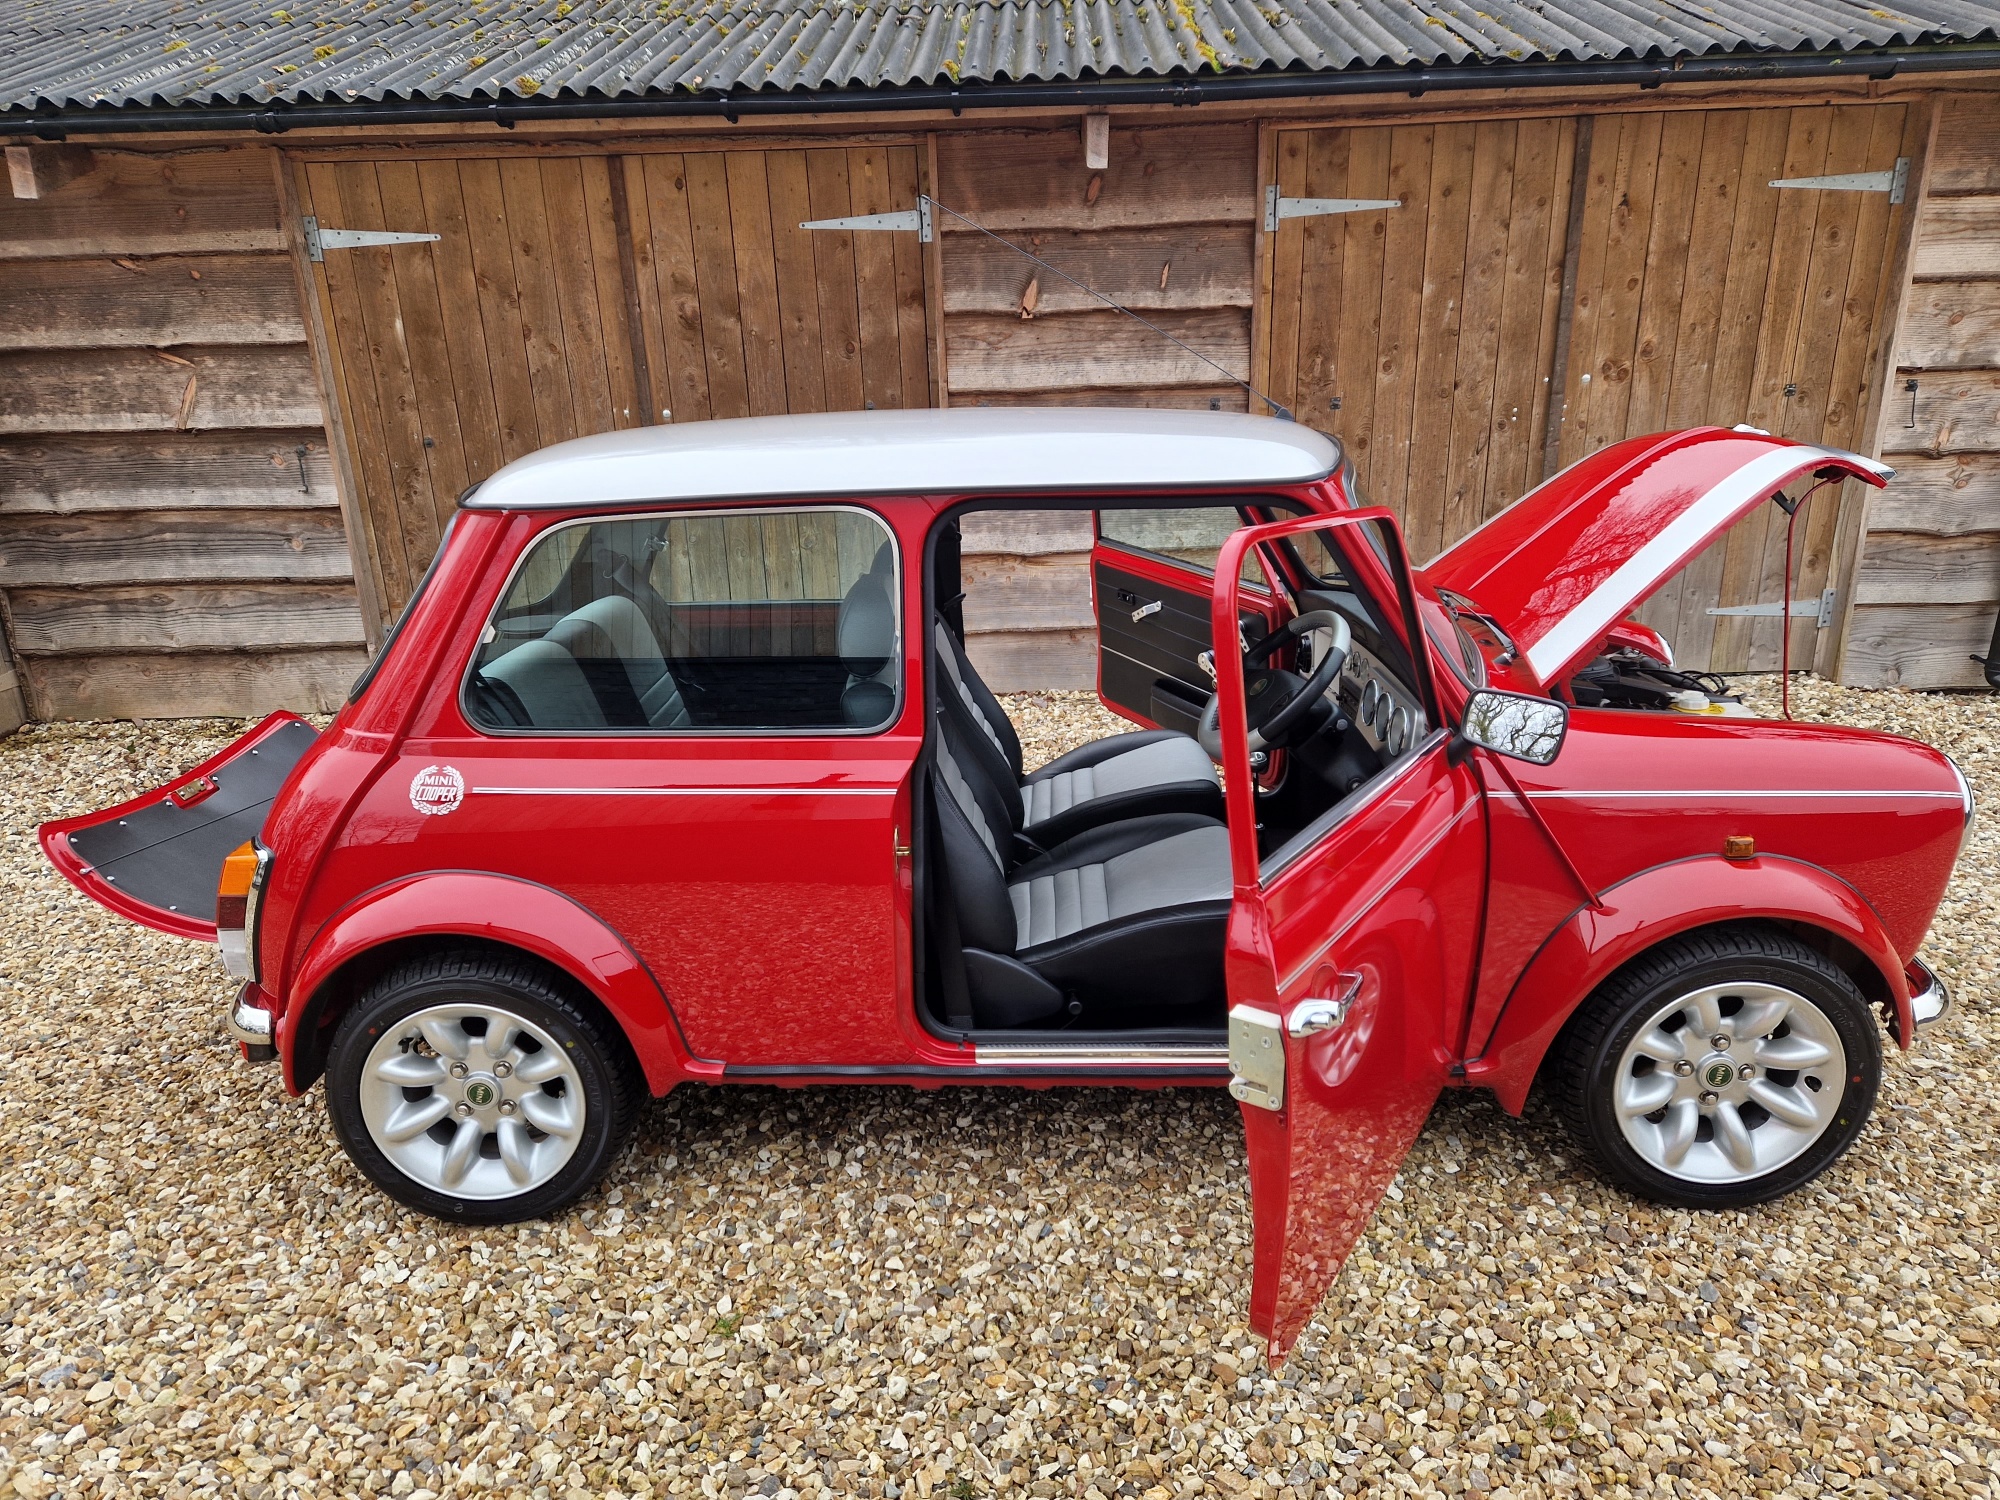 ** NOW SOLD ** 2000 X Rover Mini Cooper Sport On Just 2600 Miles From New!